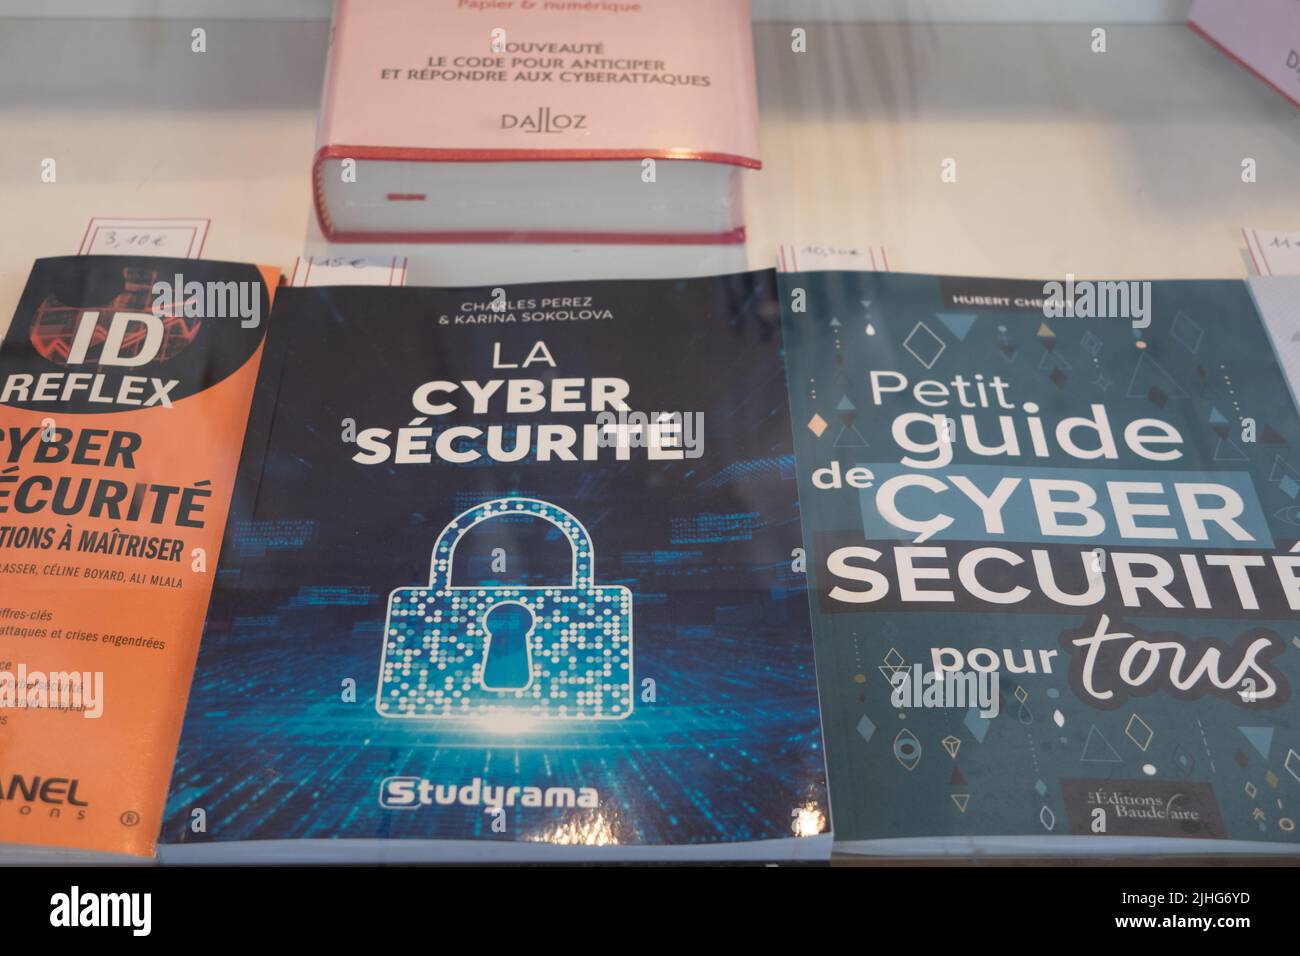 French text books on cyber security displayed Paris France Stock Photo